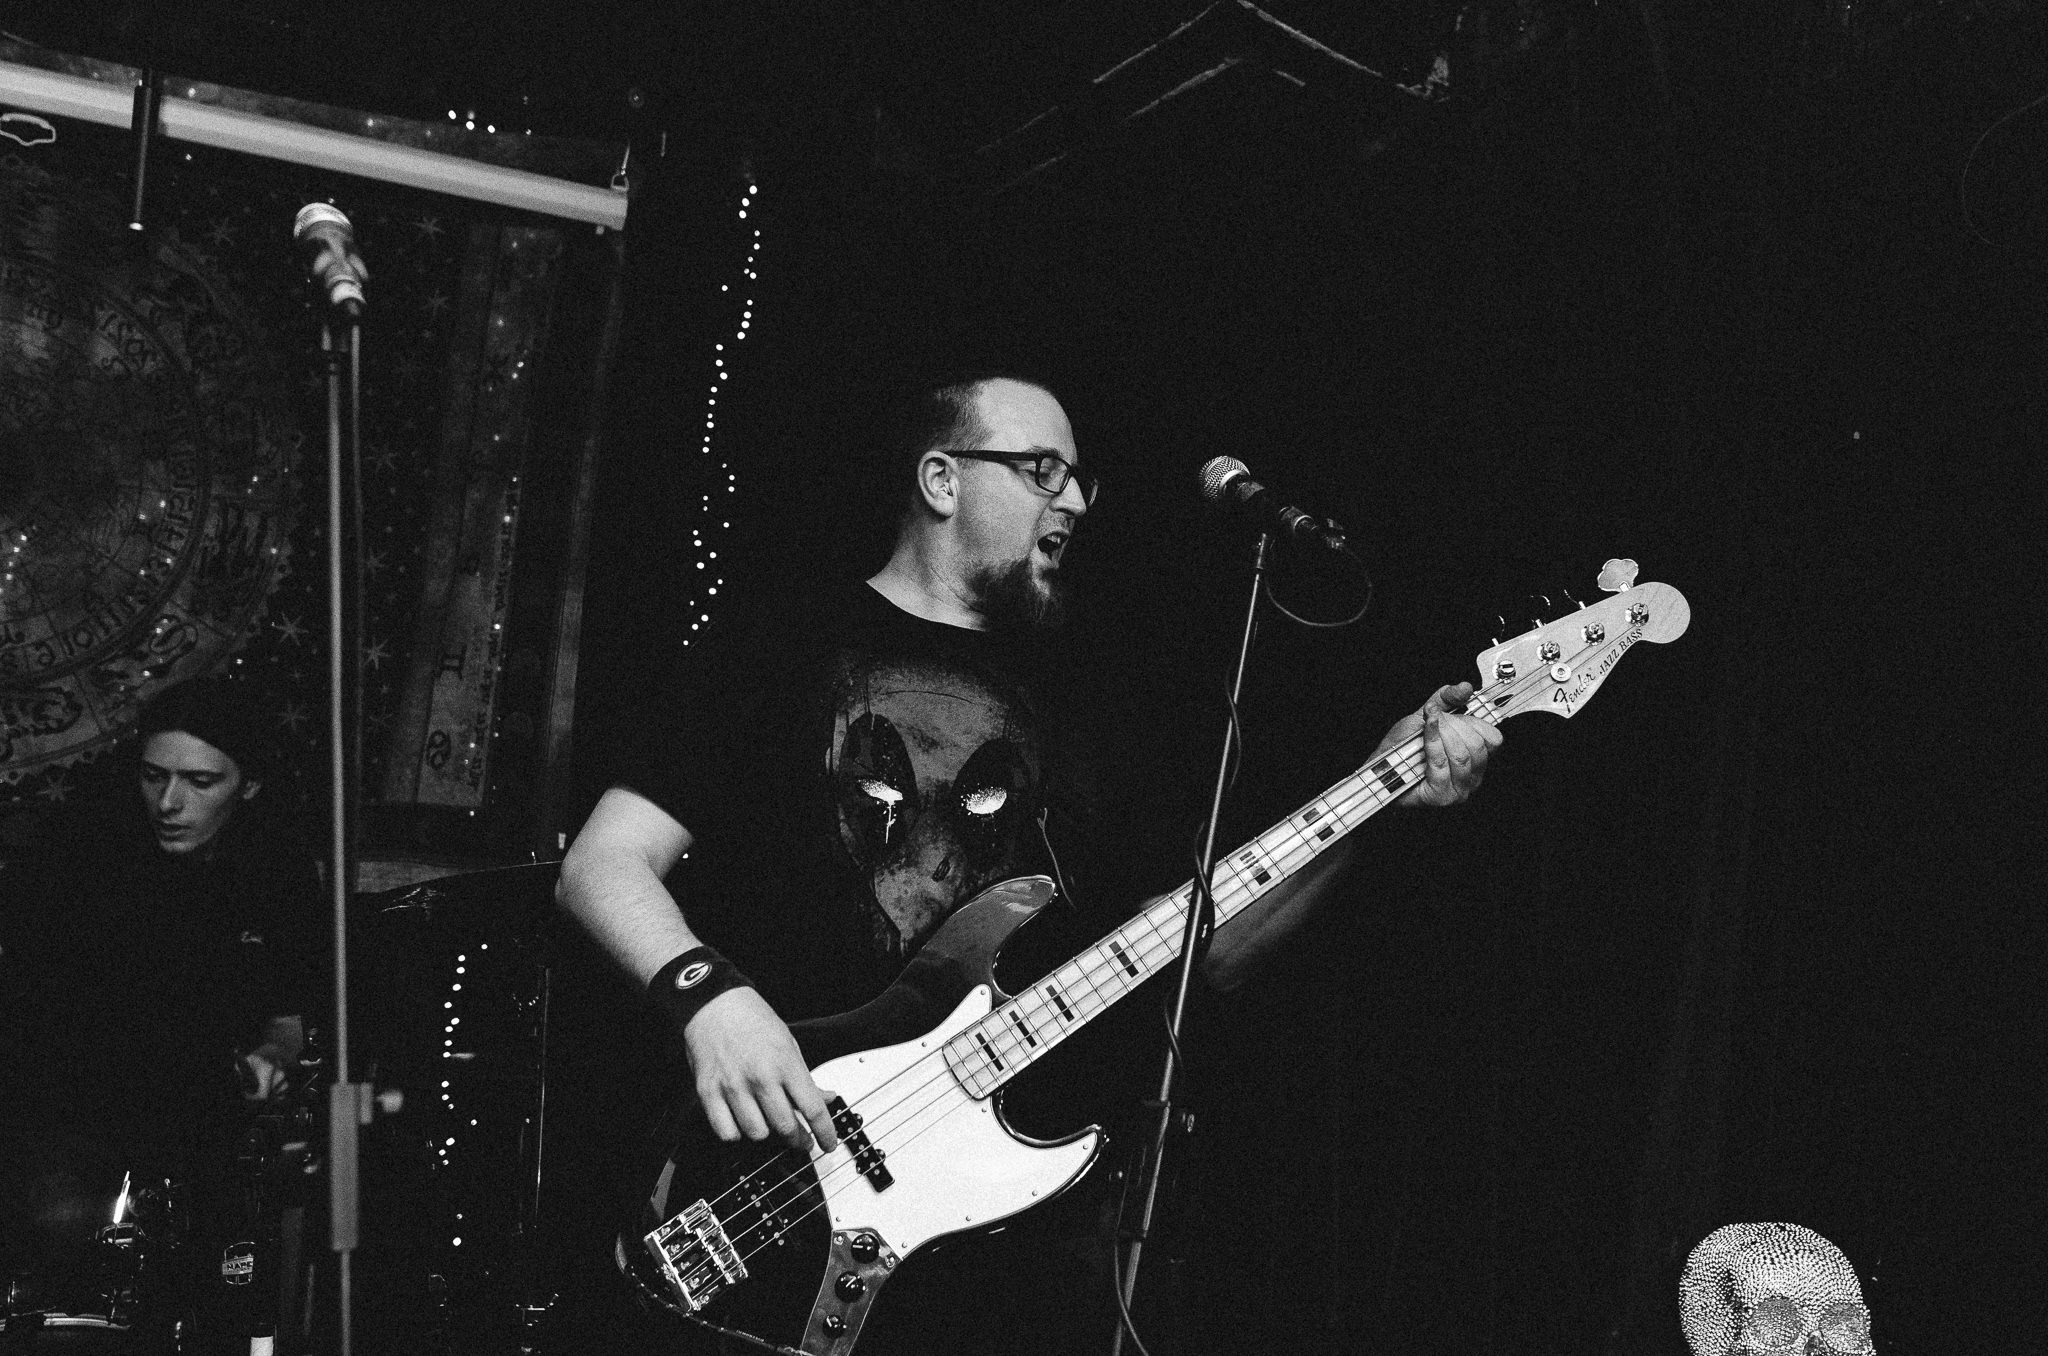 A black and white image of Christopher playing and singing along